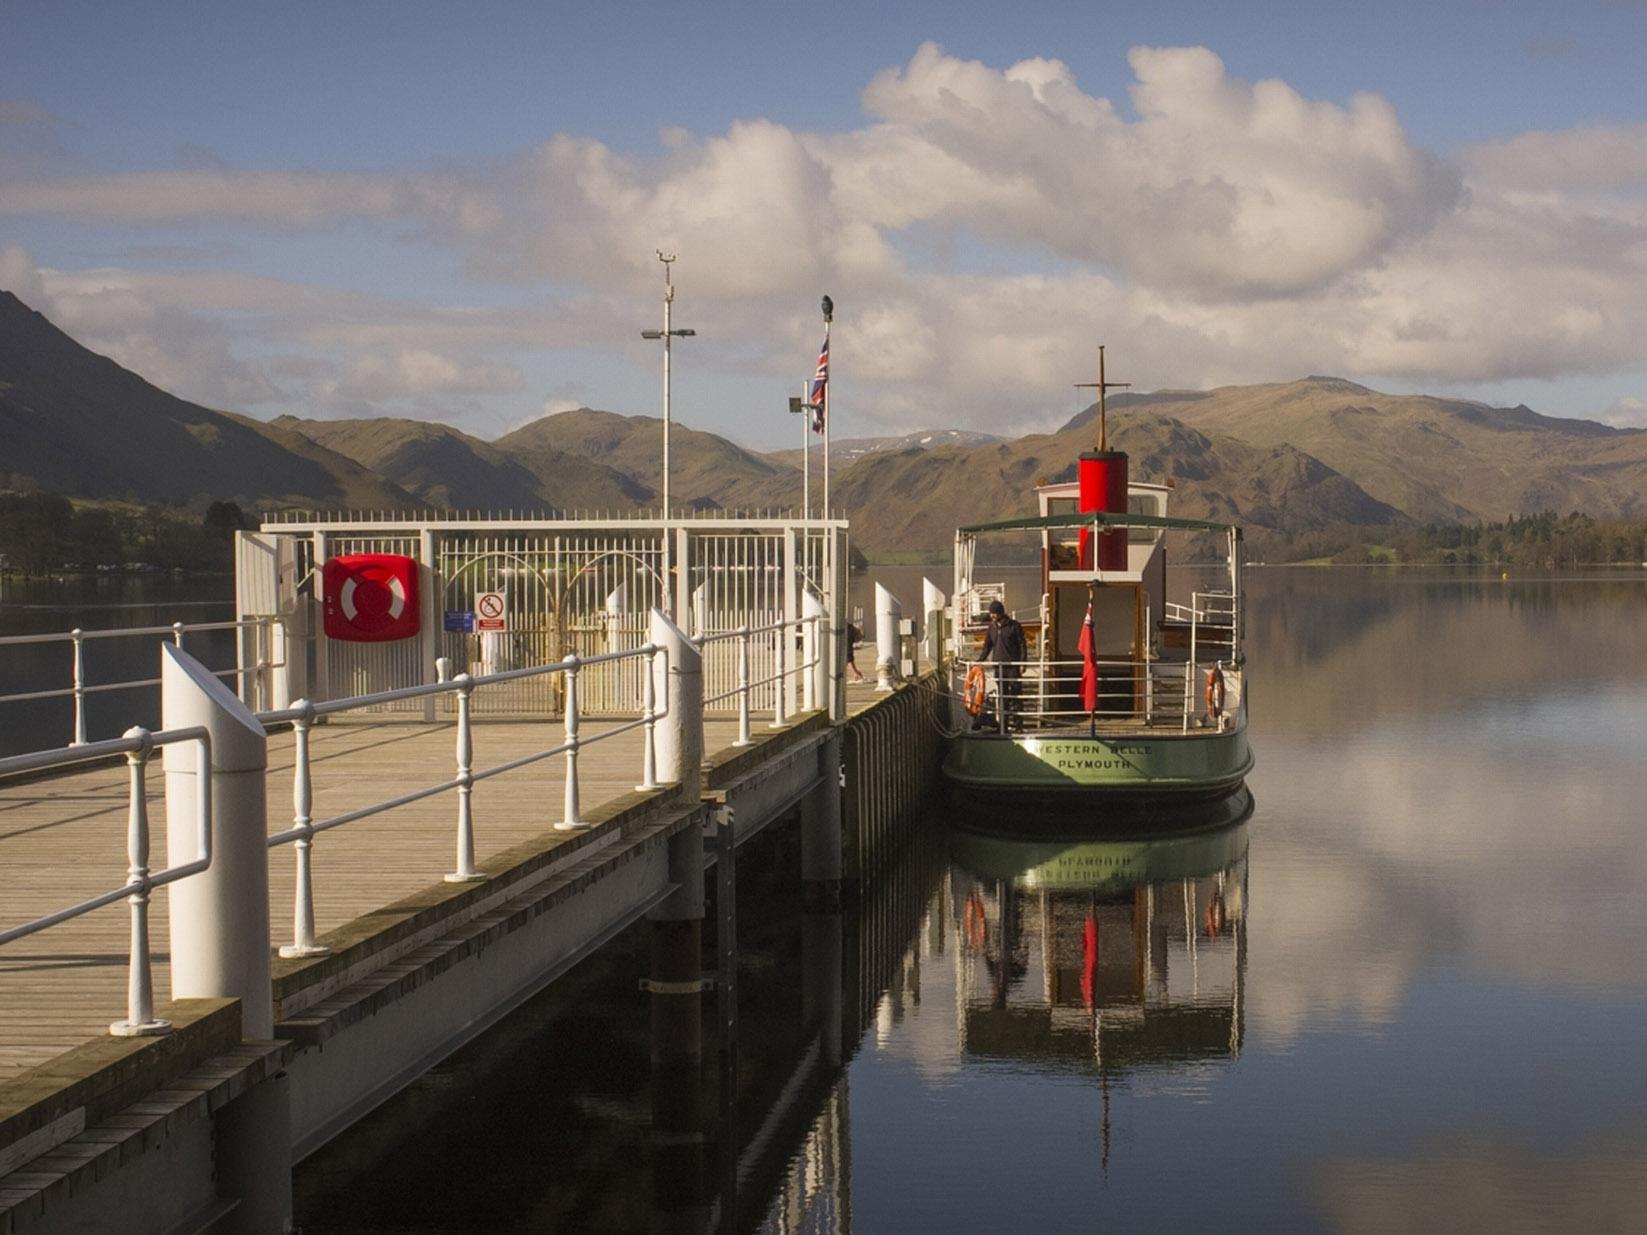 The Western Belle, one of the Ullswater steamers